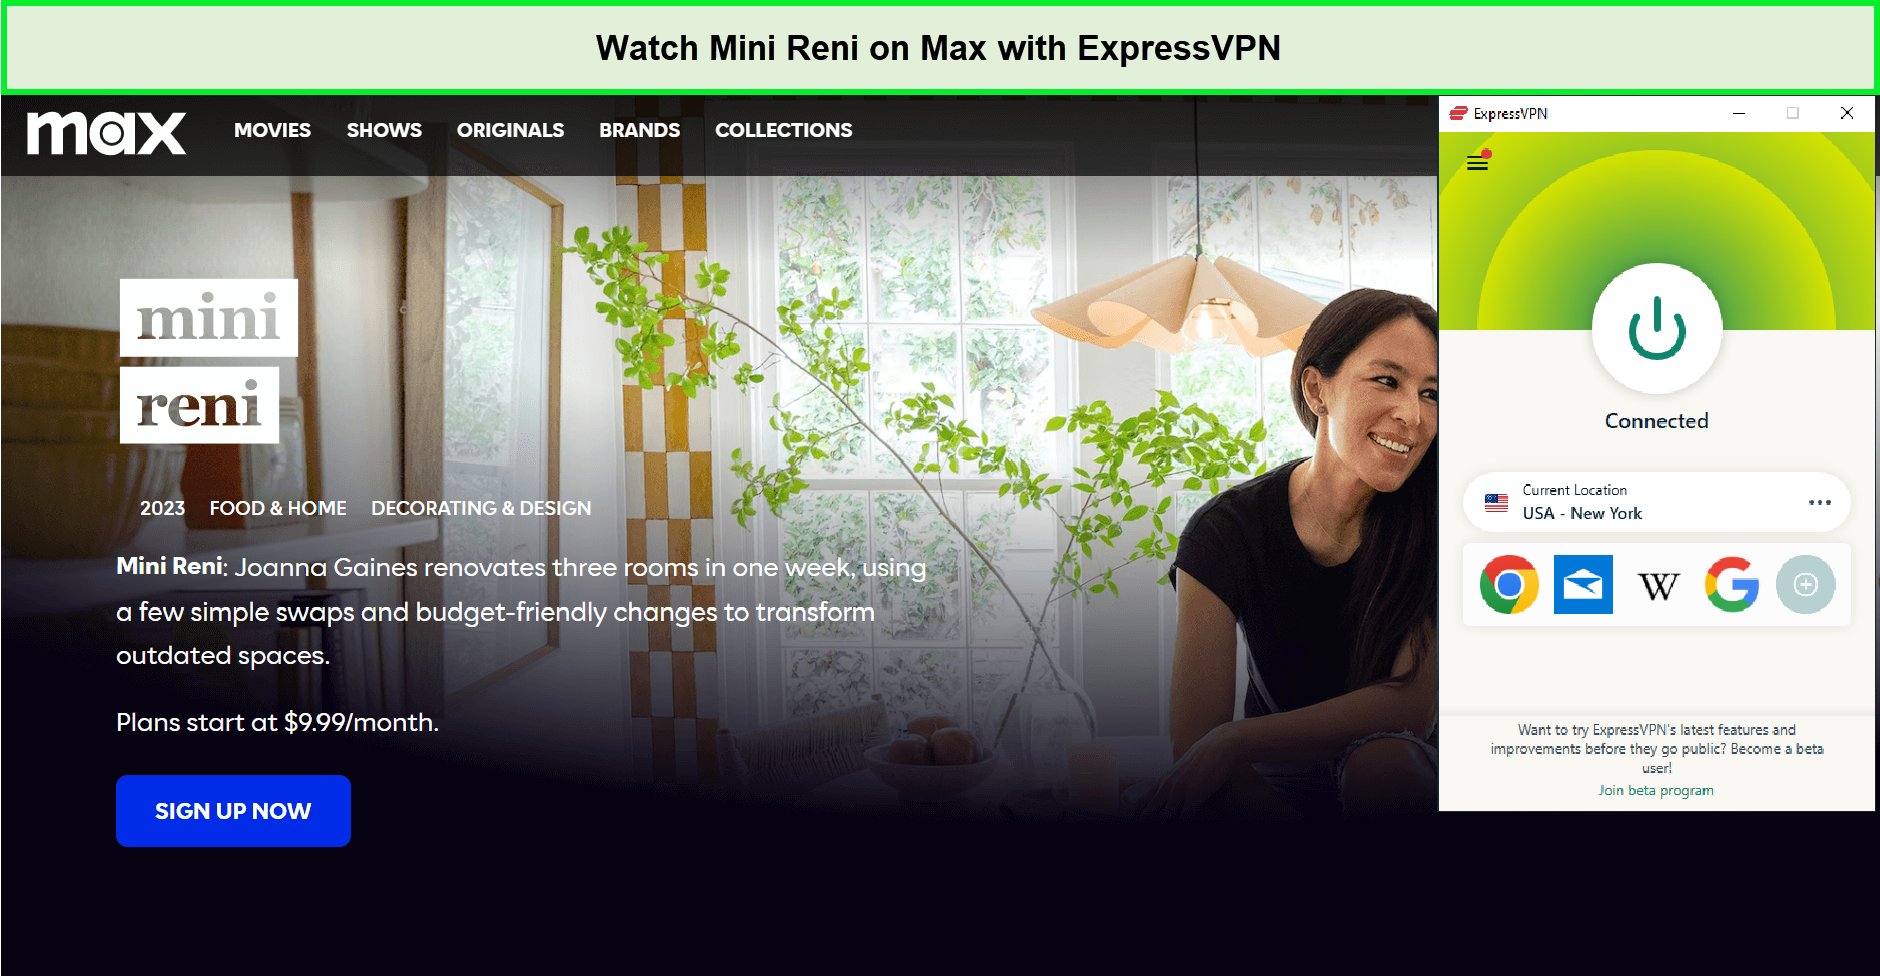 Watch-Mini-Reni-in-New Zealand-on-Max-with-ExpressVPN